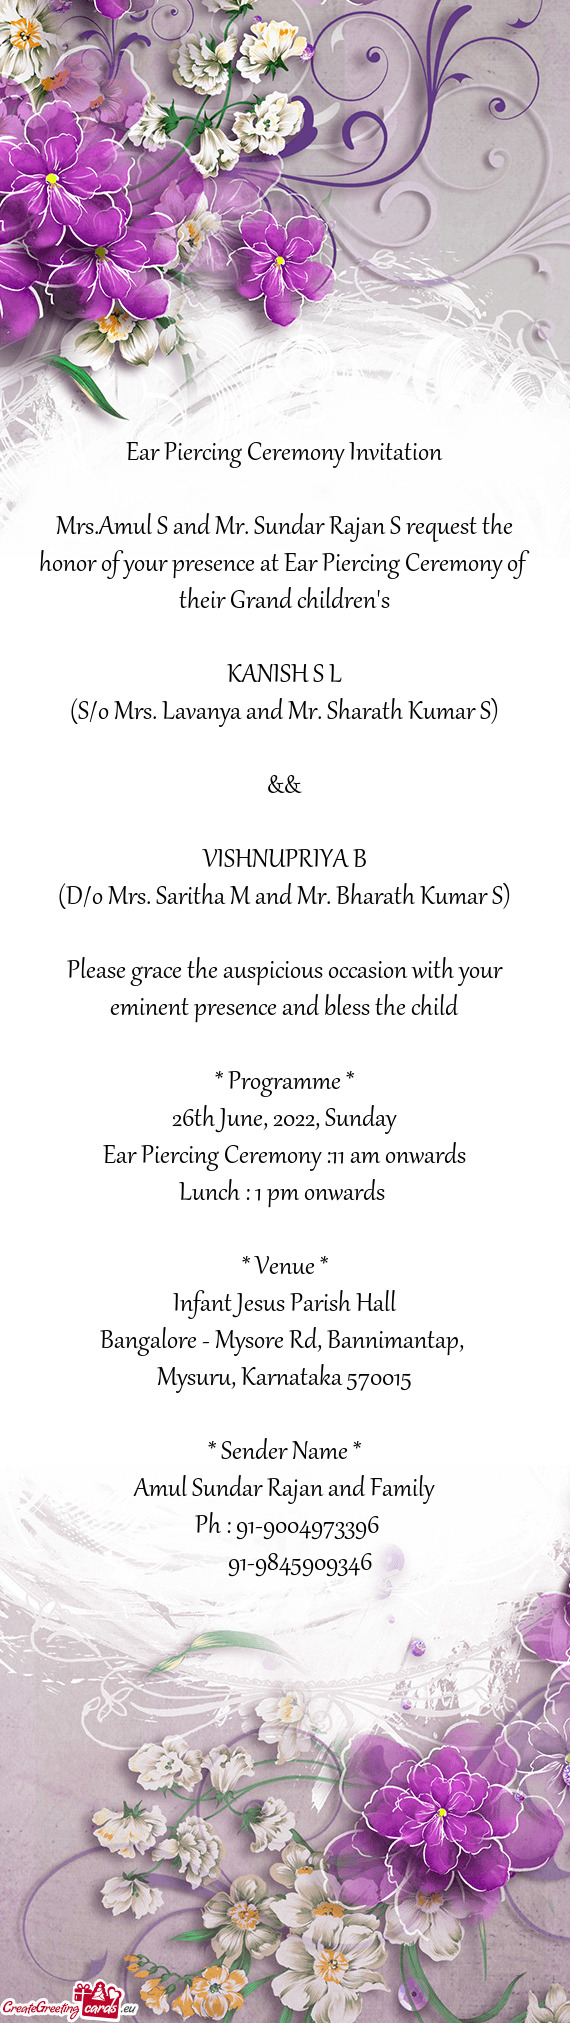 Mrs.Amul S and Mr. Sundar Rajan S request the honor of your presence at Ear Piercing Ceremony of the